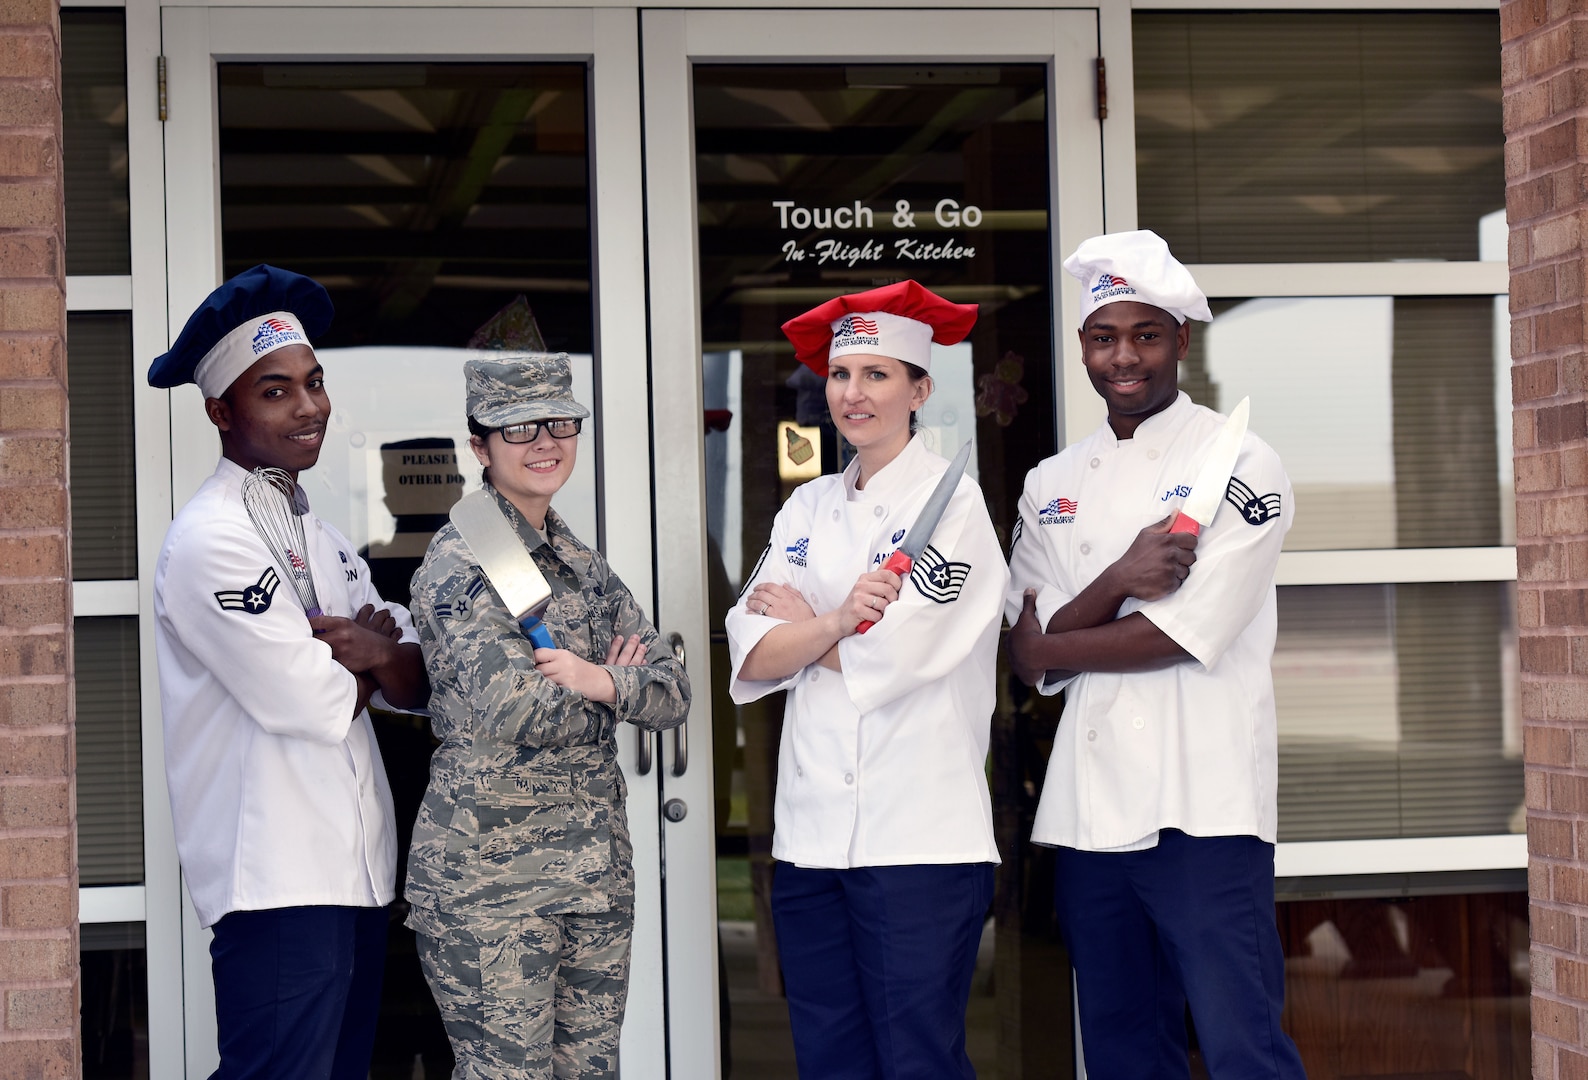 From left to right, Airman 1st Class Mrqkze Macon, Airman 1st Class Shelby Carson, Tech. Sgt. Jessica Ancheta, and Senior Airman Demarcus Johnson, all Airmen assigned to the 509th Force Support Squadron, stand outside of the "Touch & Go" kitchen on the flightline at Whiteman Air Force Base, Mo., Dec. 11, 2017.